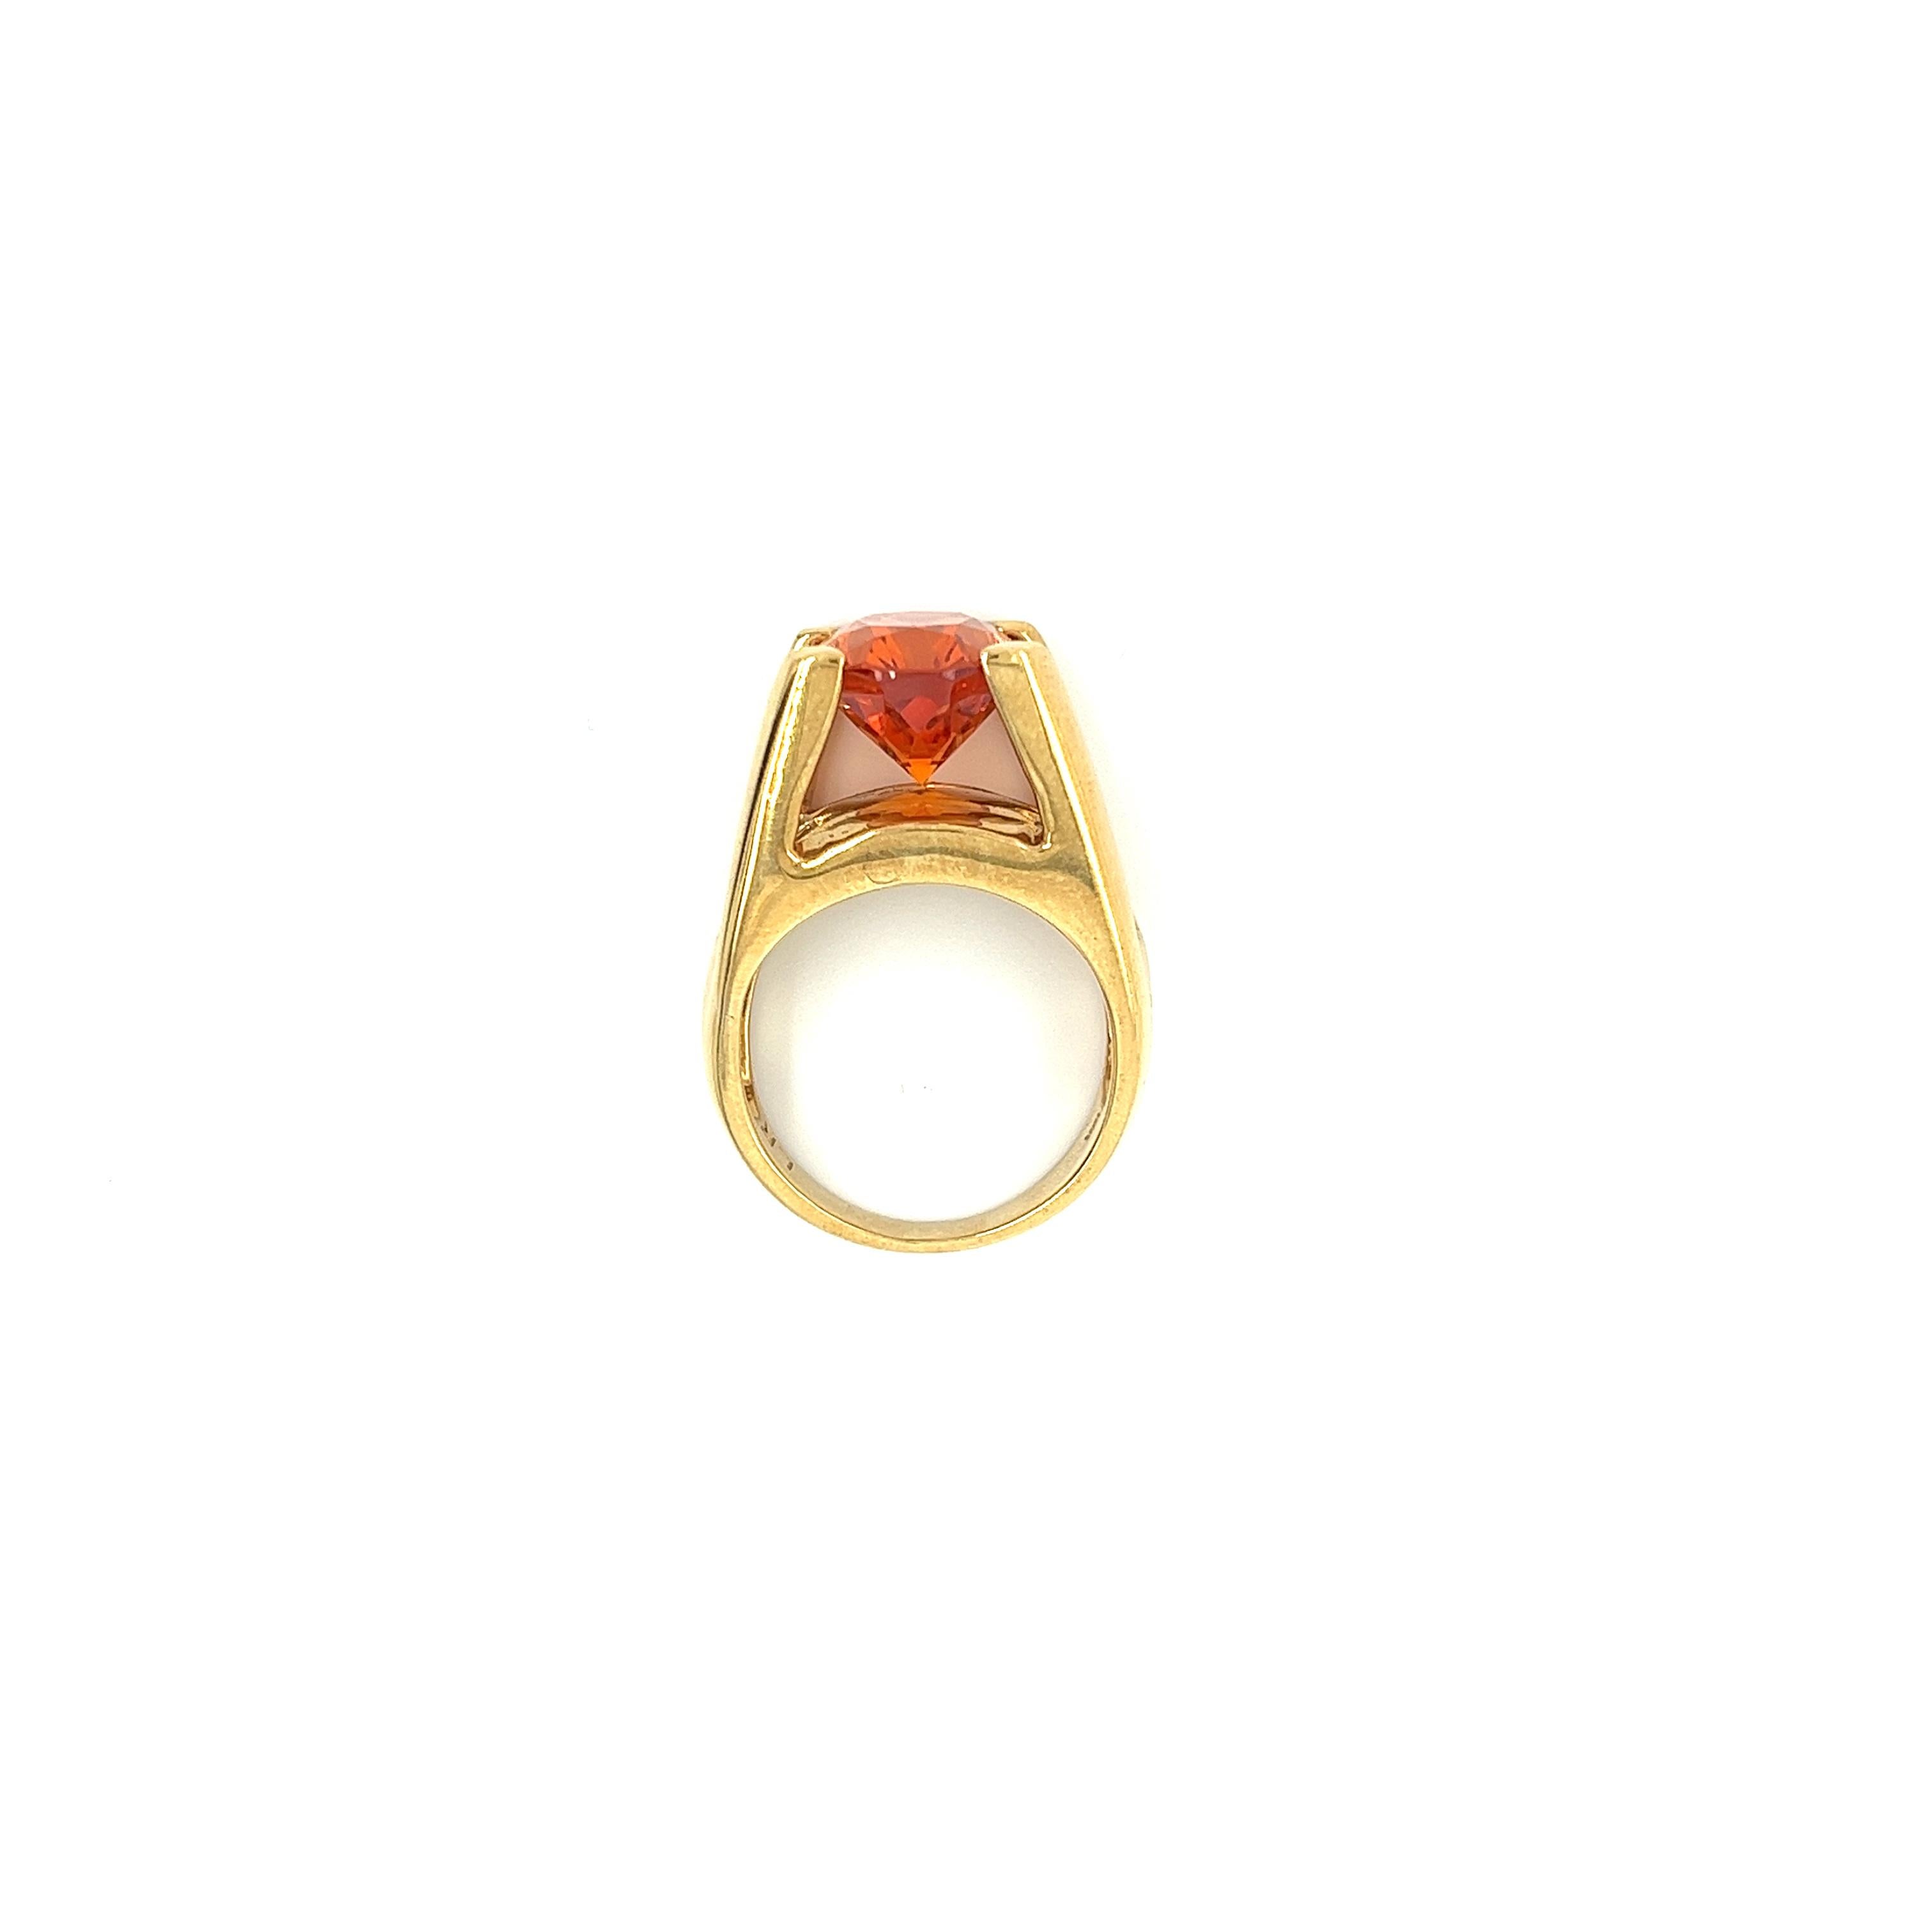 GIA Certified Unisex Ring in 18K Yellow Gold, weighing 14.90 grams, boasting a 13.5 carat oval cut Spessartine Garnet center stone. The vibrant orange gem is superbly clean and lustrous. Exploding with color and brilliance. Adorned with 16 princess